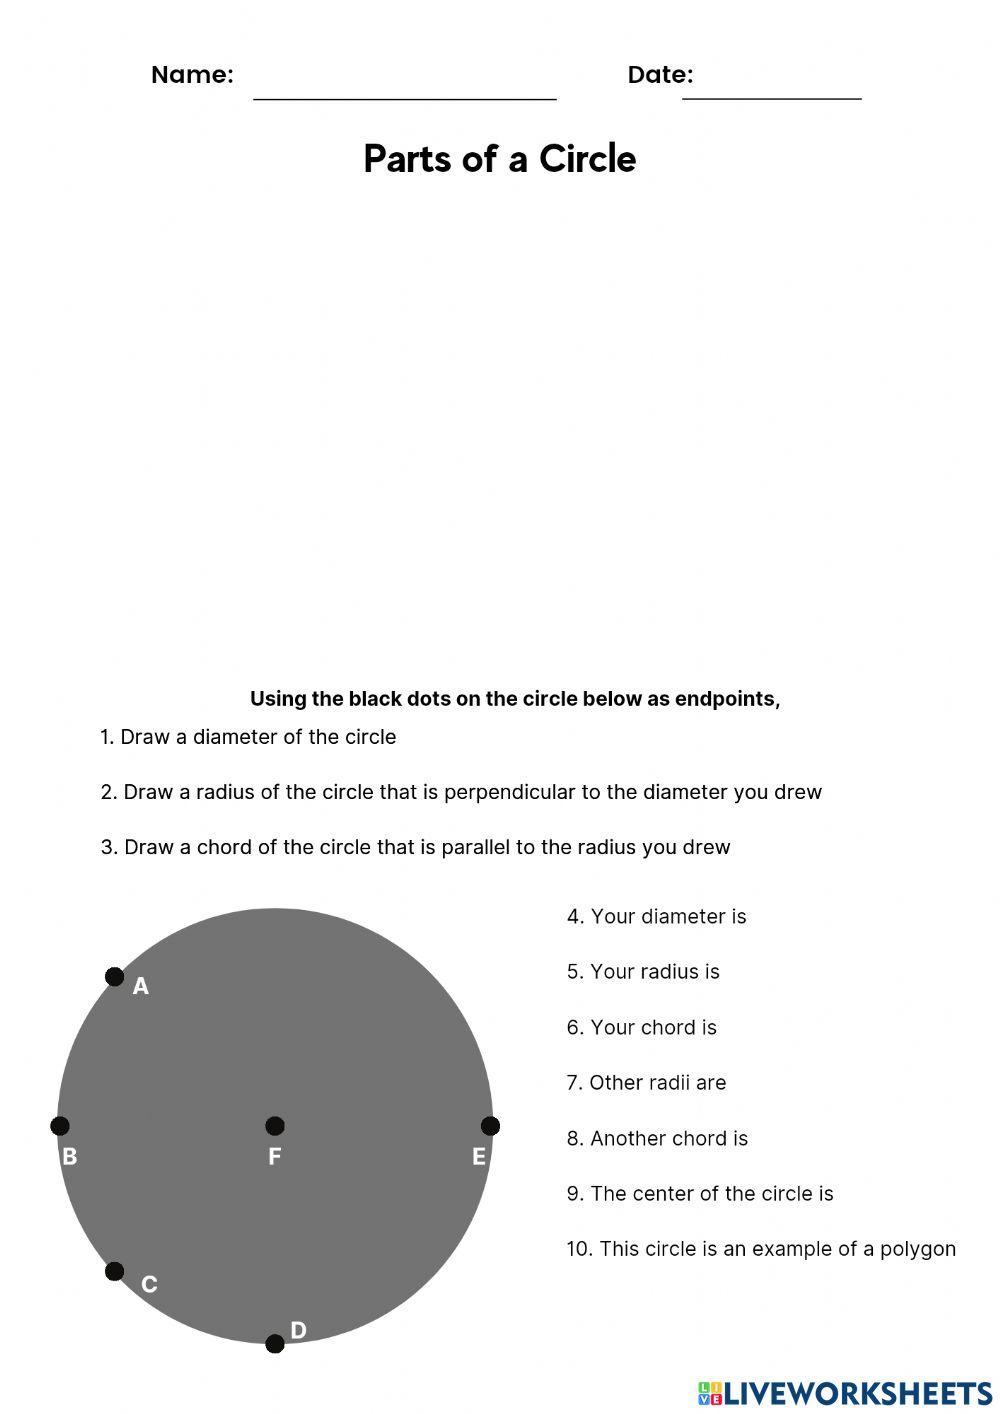 Identify Parts of a Circle